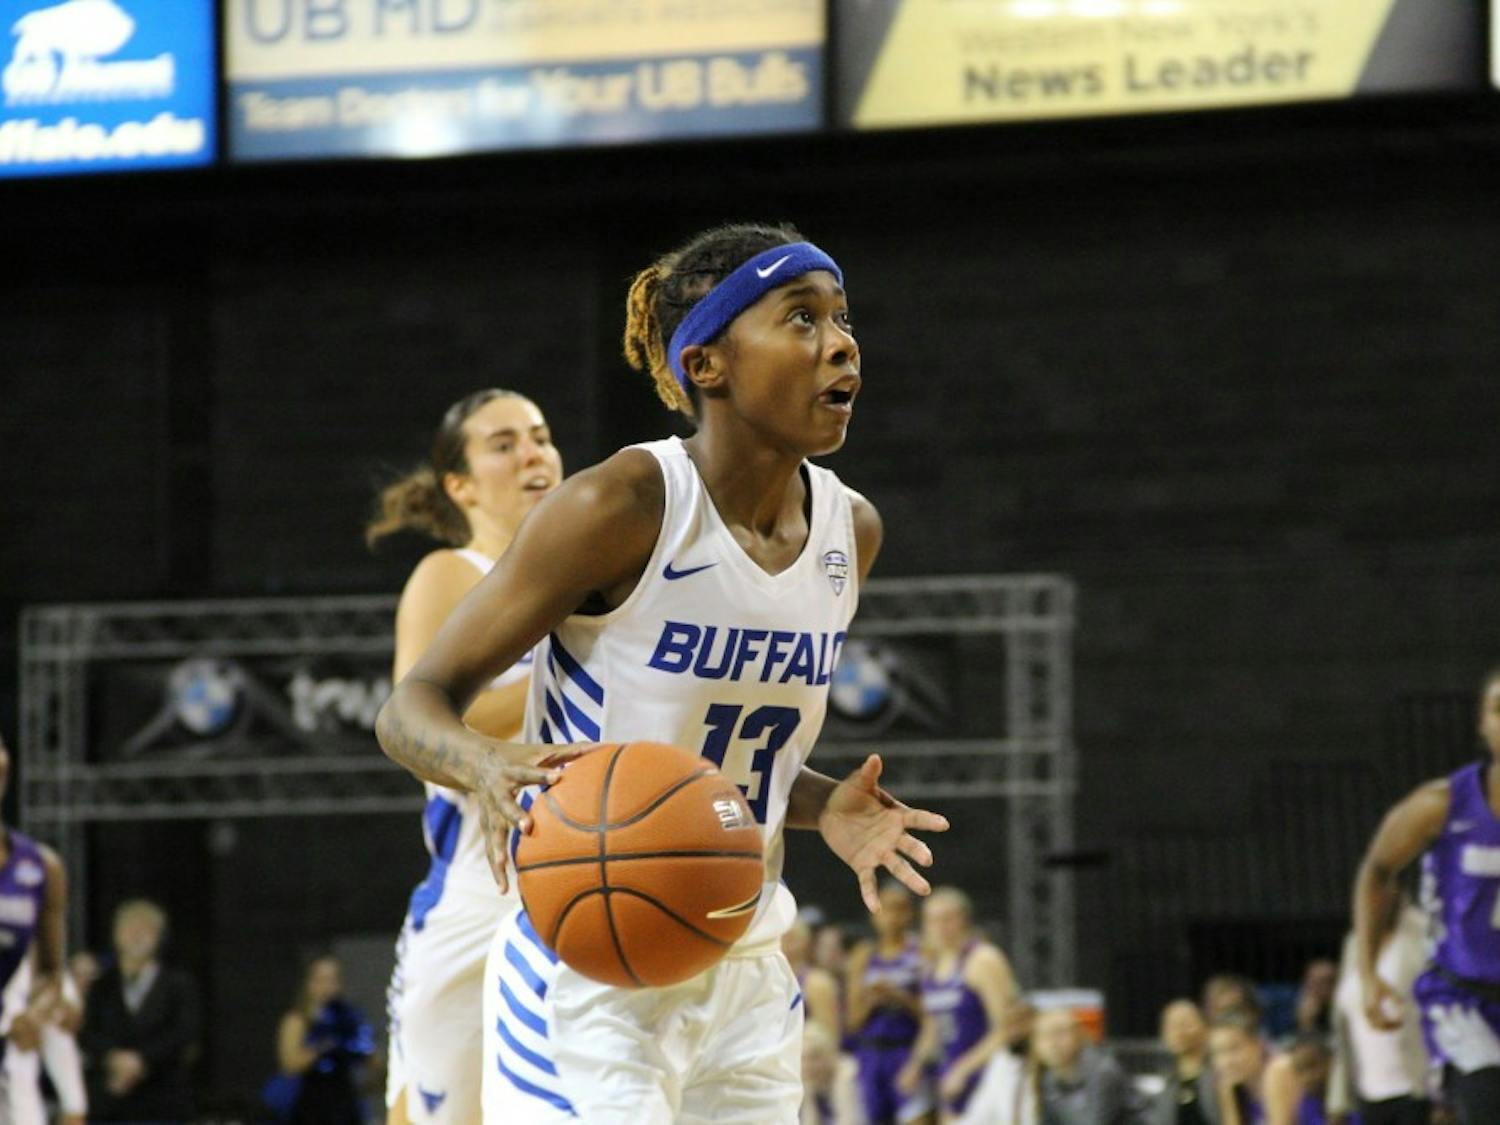 The Bulls (16-6, 8-3 Mid-American Conference) were upset by the Bowling Green Falcons (8-14, 1-10 MAC) 78-72 Wednesday night. Buffalo was down 20 points before mounting a comeback that would put them down one with two minutes left. Senior guard Autumn Jones finished with a season-high 17 points in the loss and senior guard Cierra Dillard contributed 26 points and six assists.